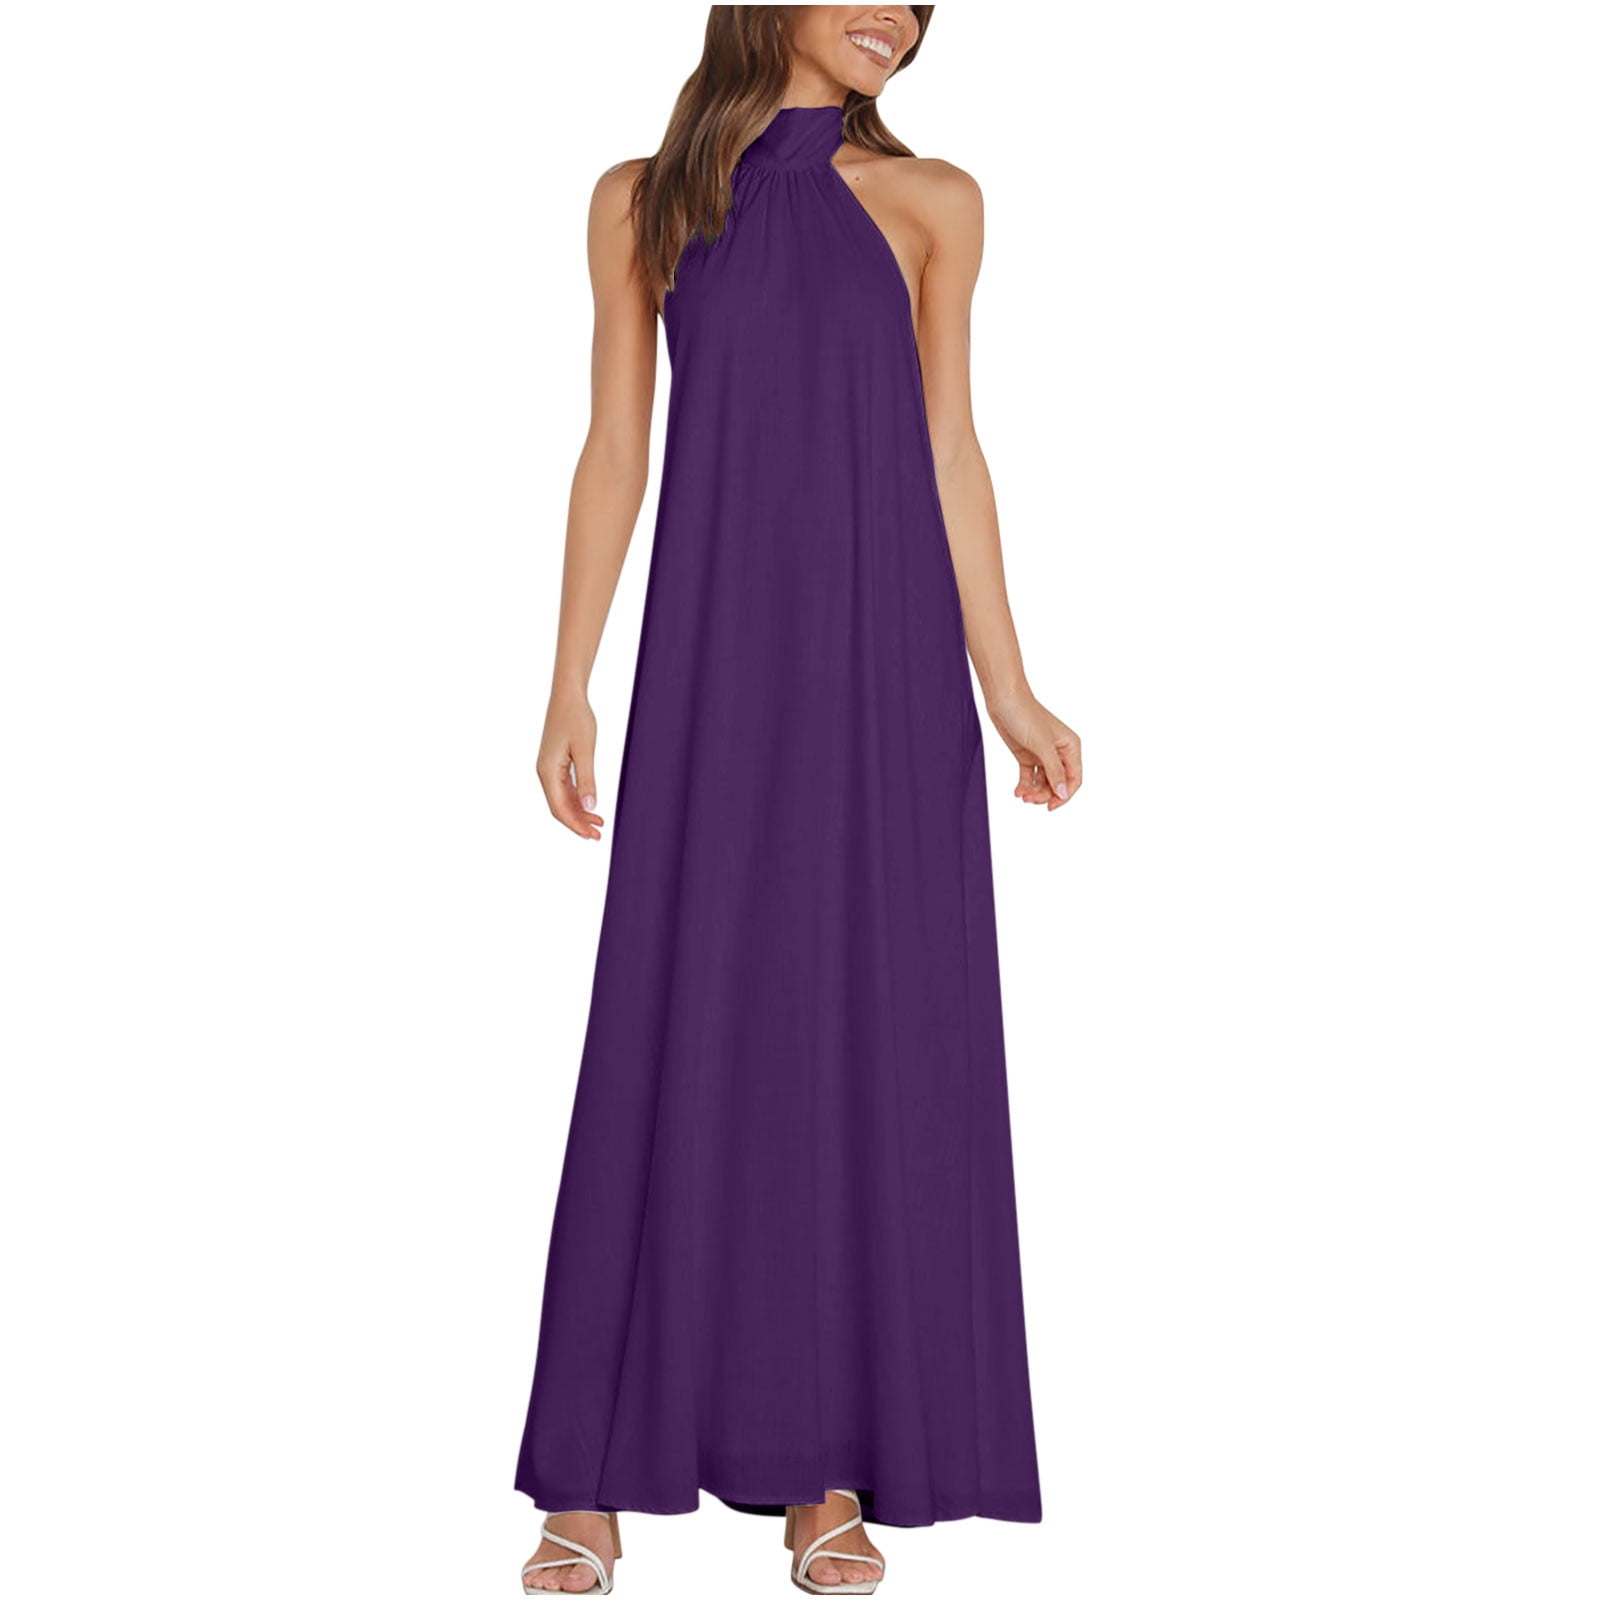 Worparsen Lady Summer Dress Pullover Color Matching Maxi Dress